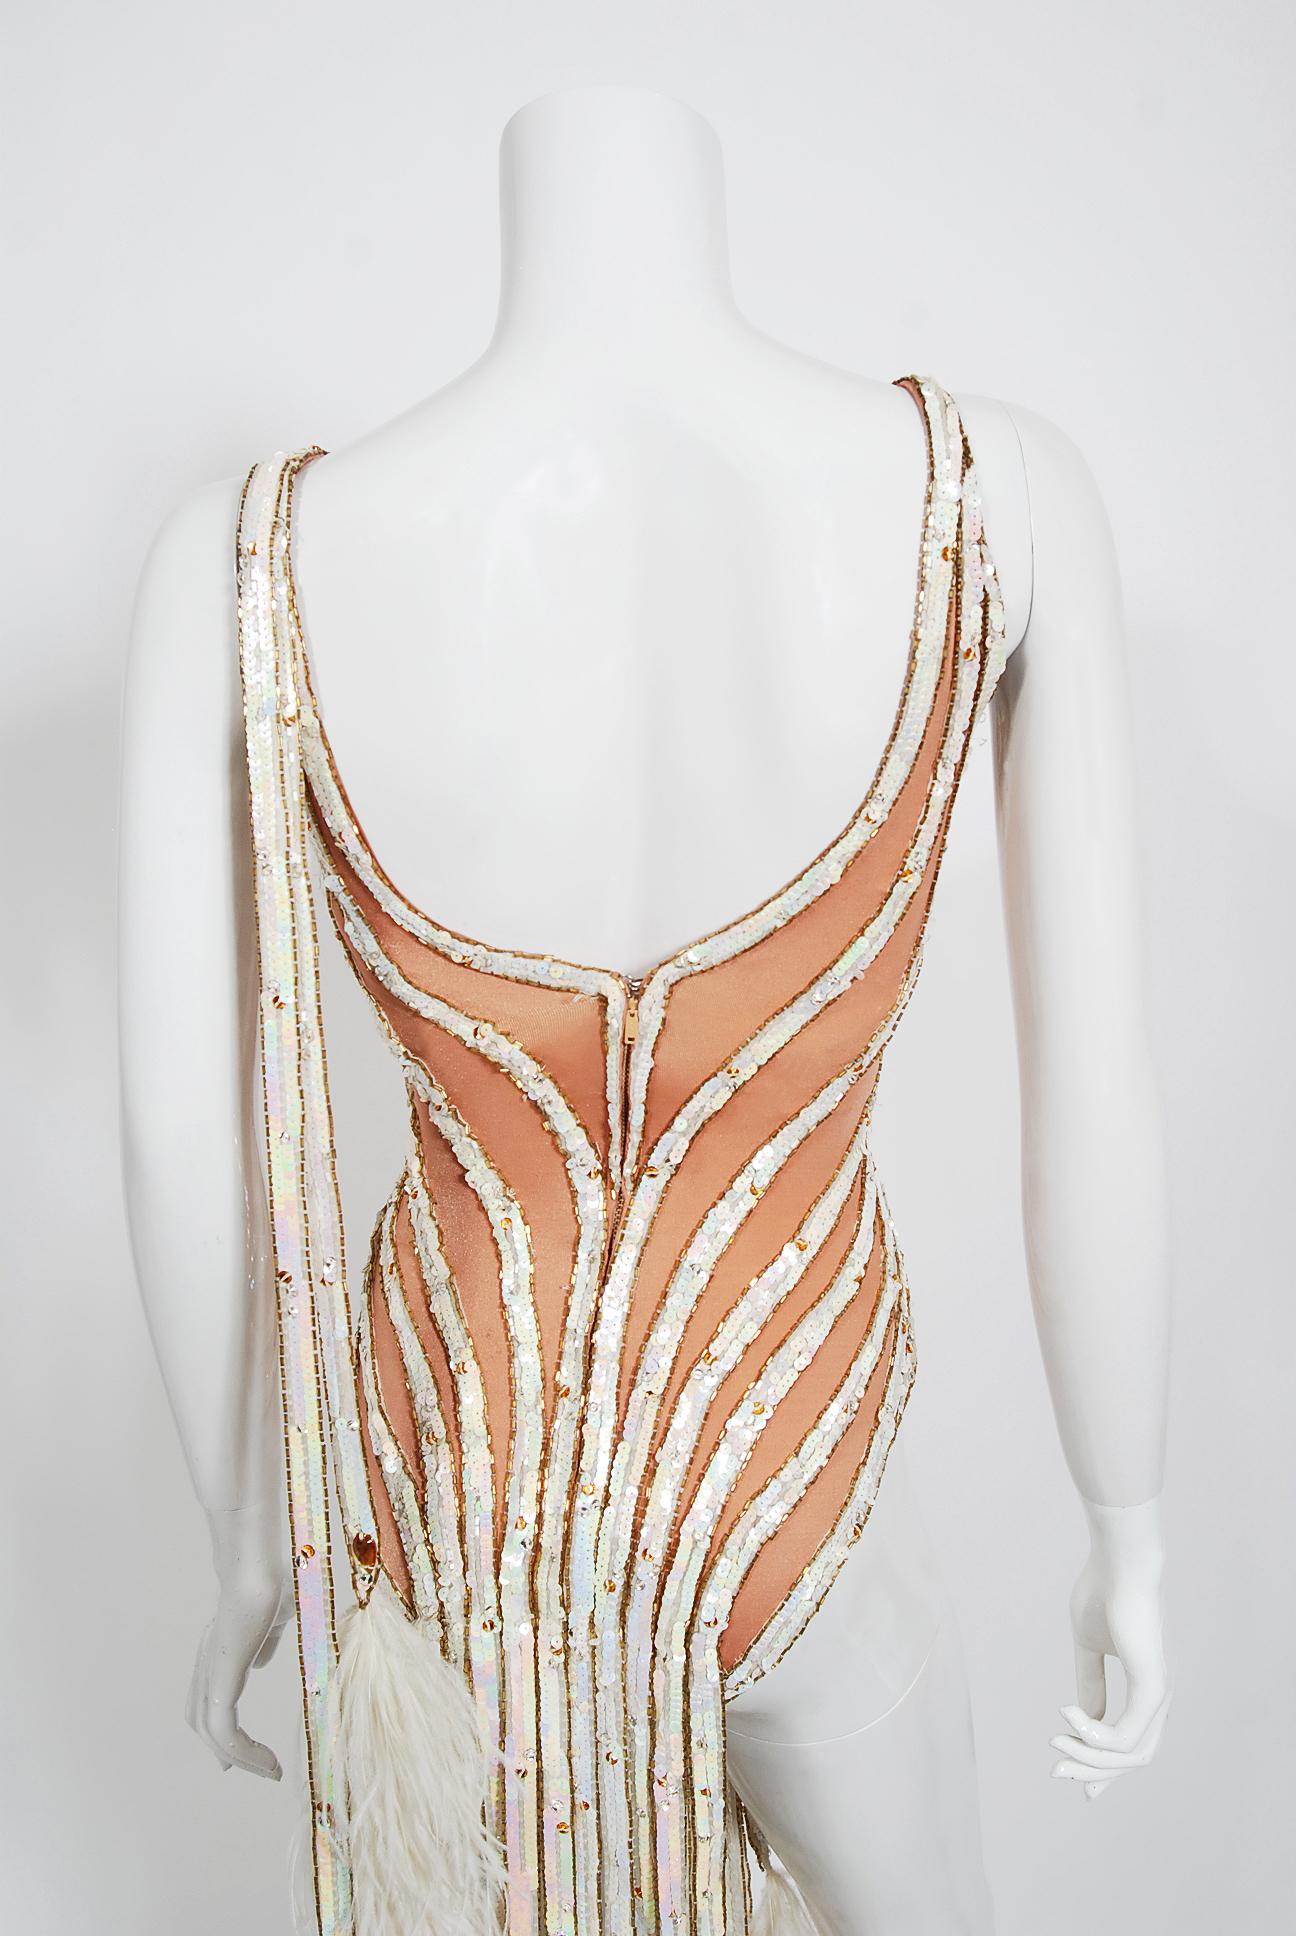 Vintage 1978 Bob Mackie for Mitzi Gaynor Documented Sequin Feather Dance Costume 6